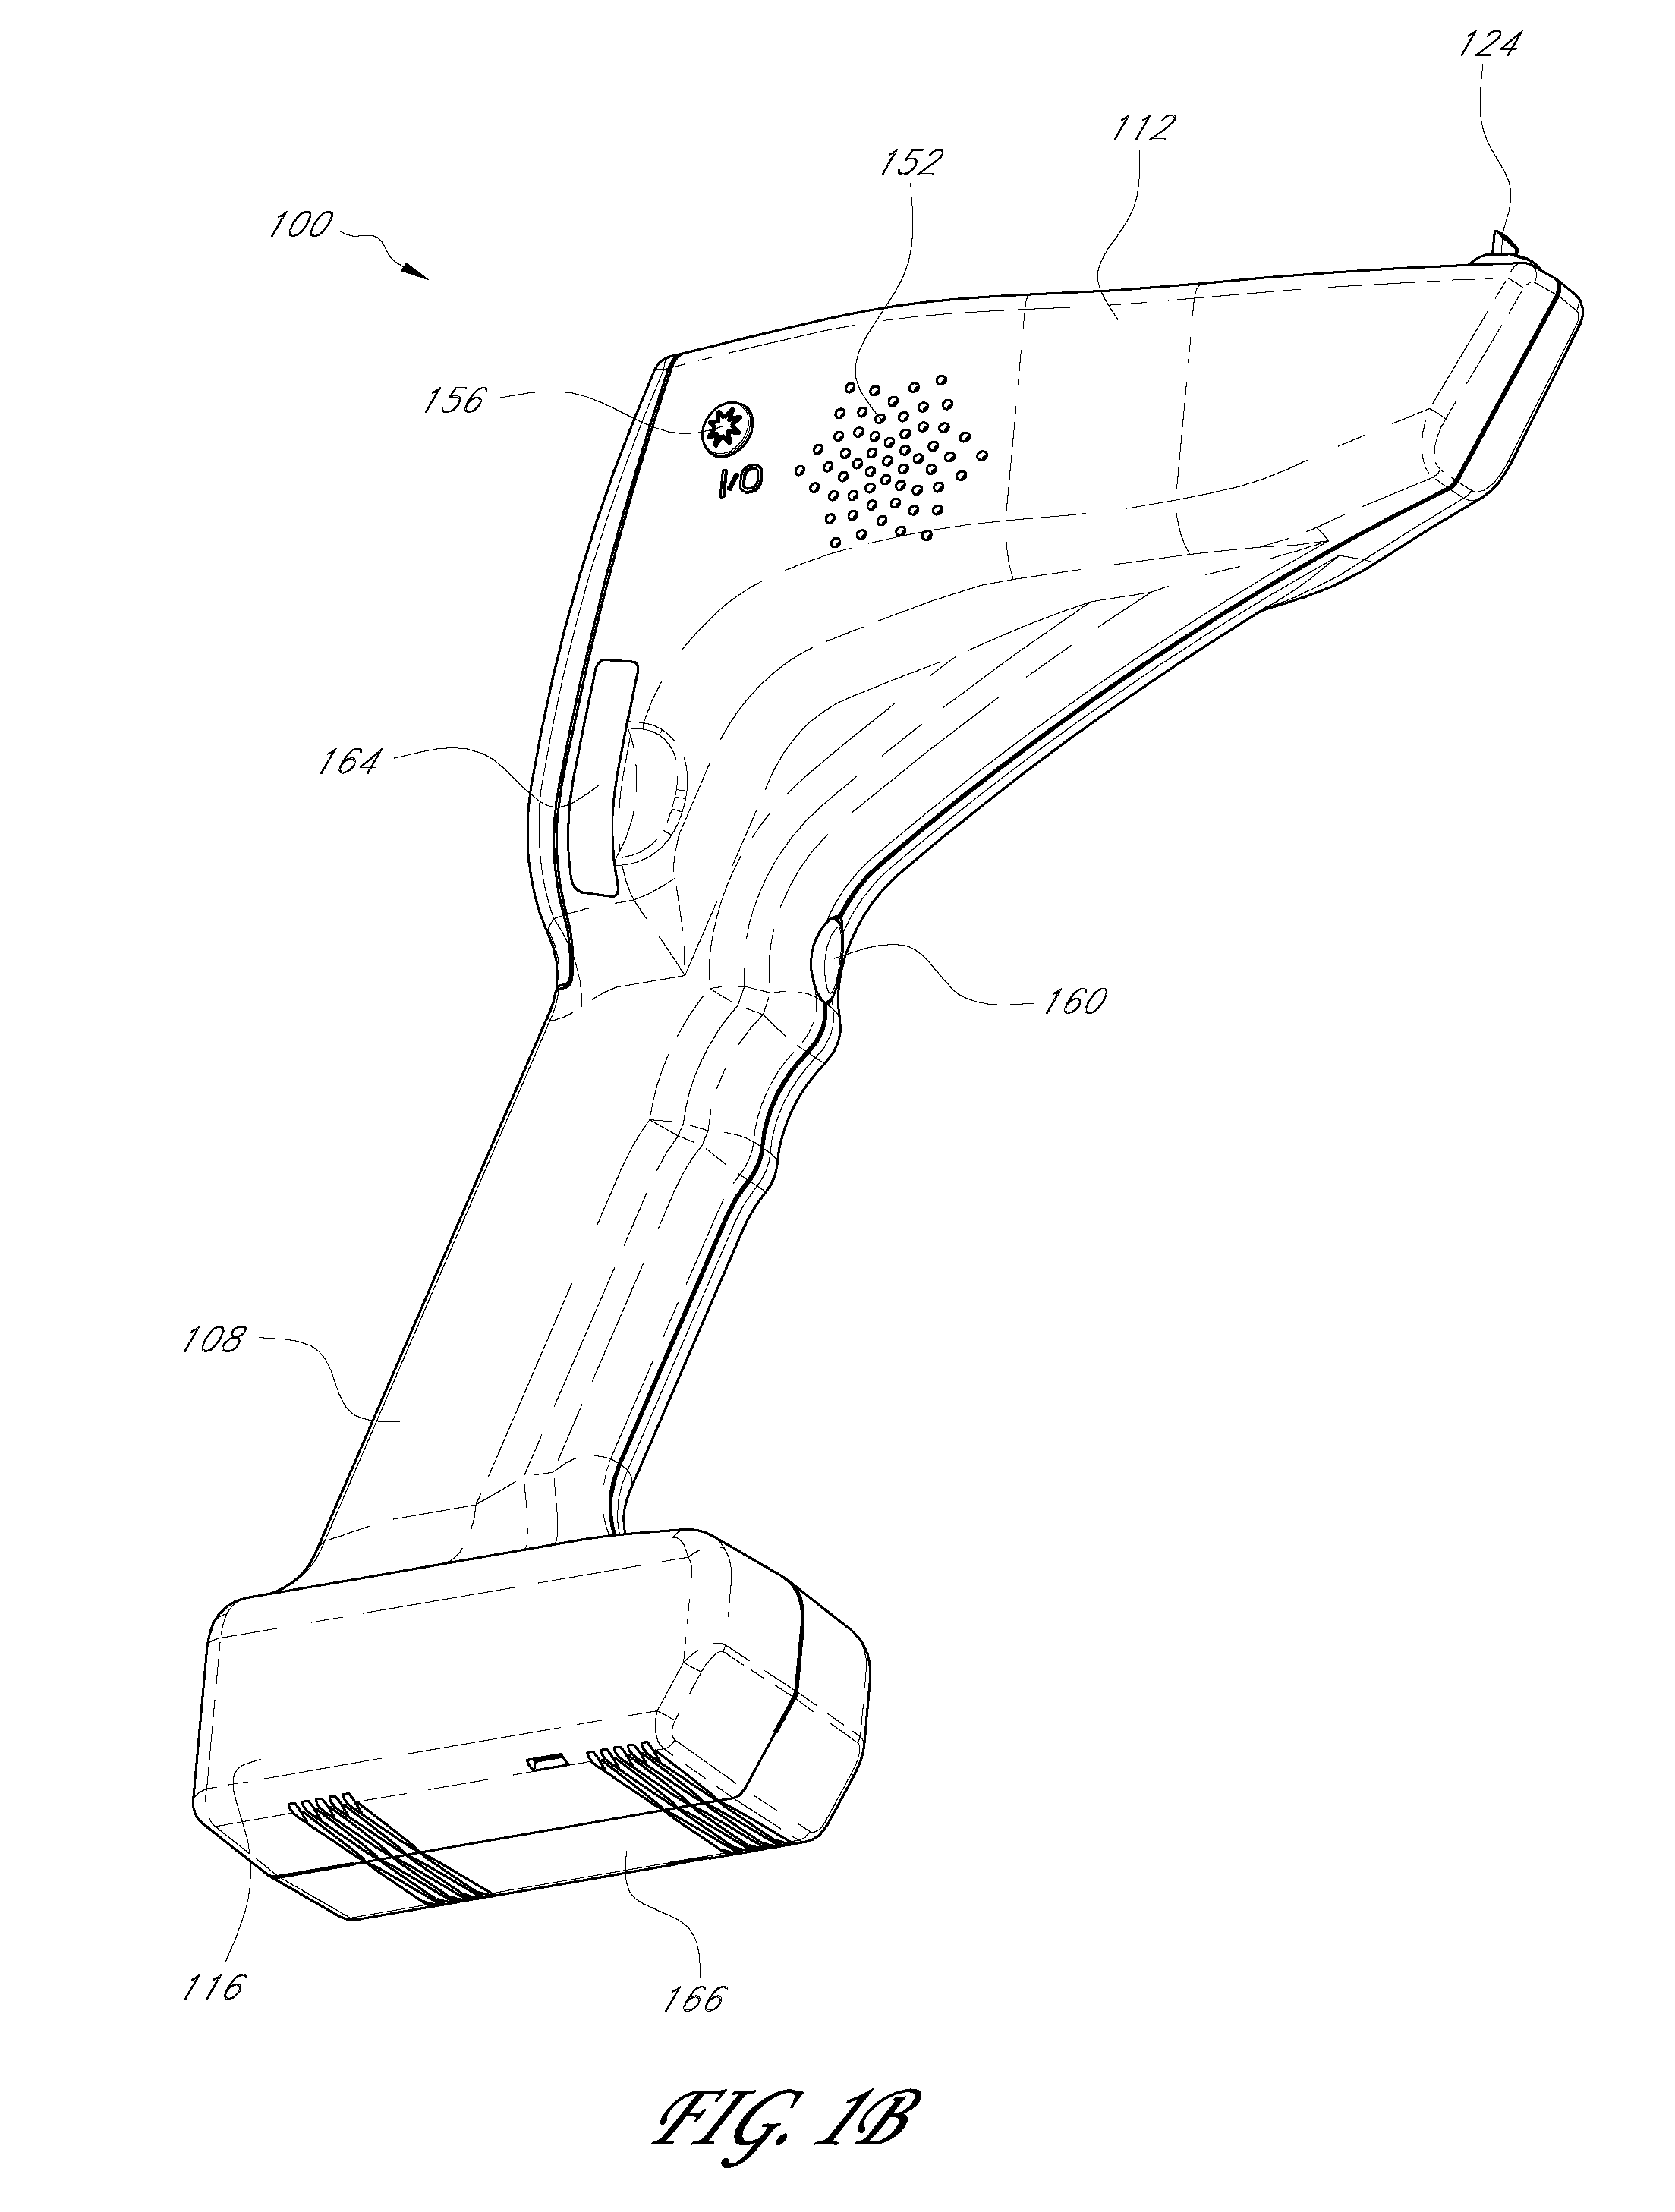 Apparatus and methods for locating and identifying remote objects